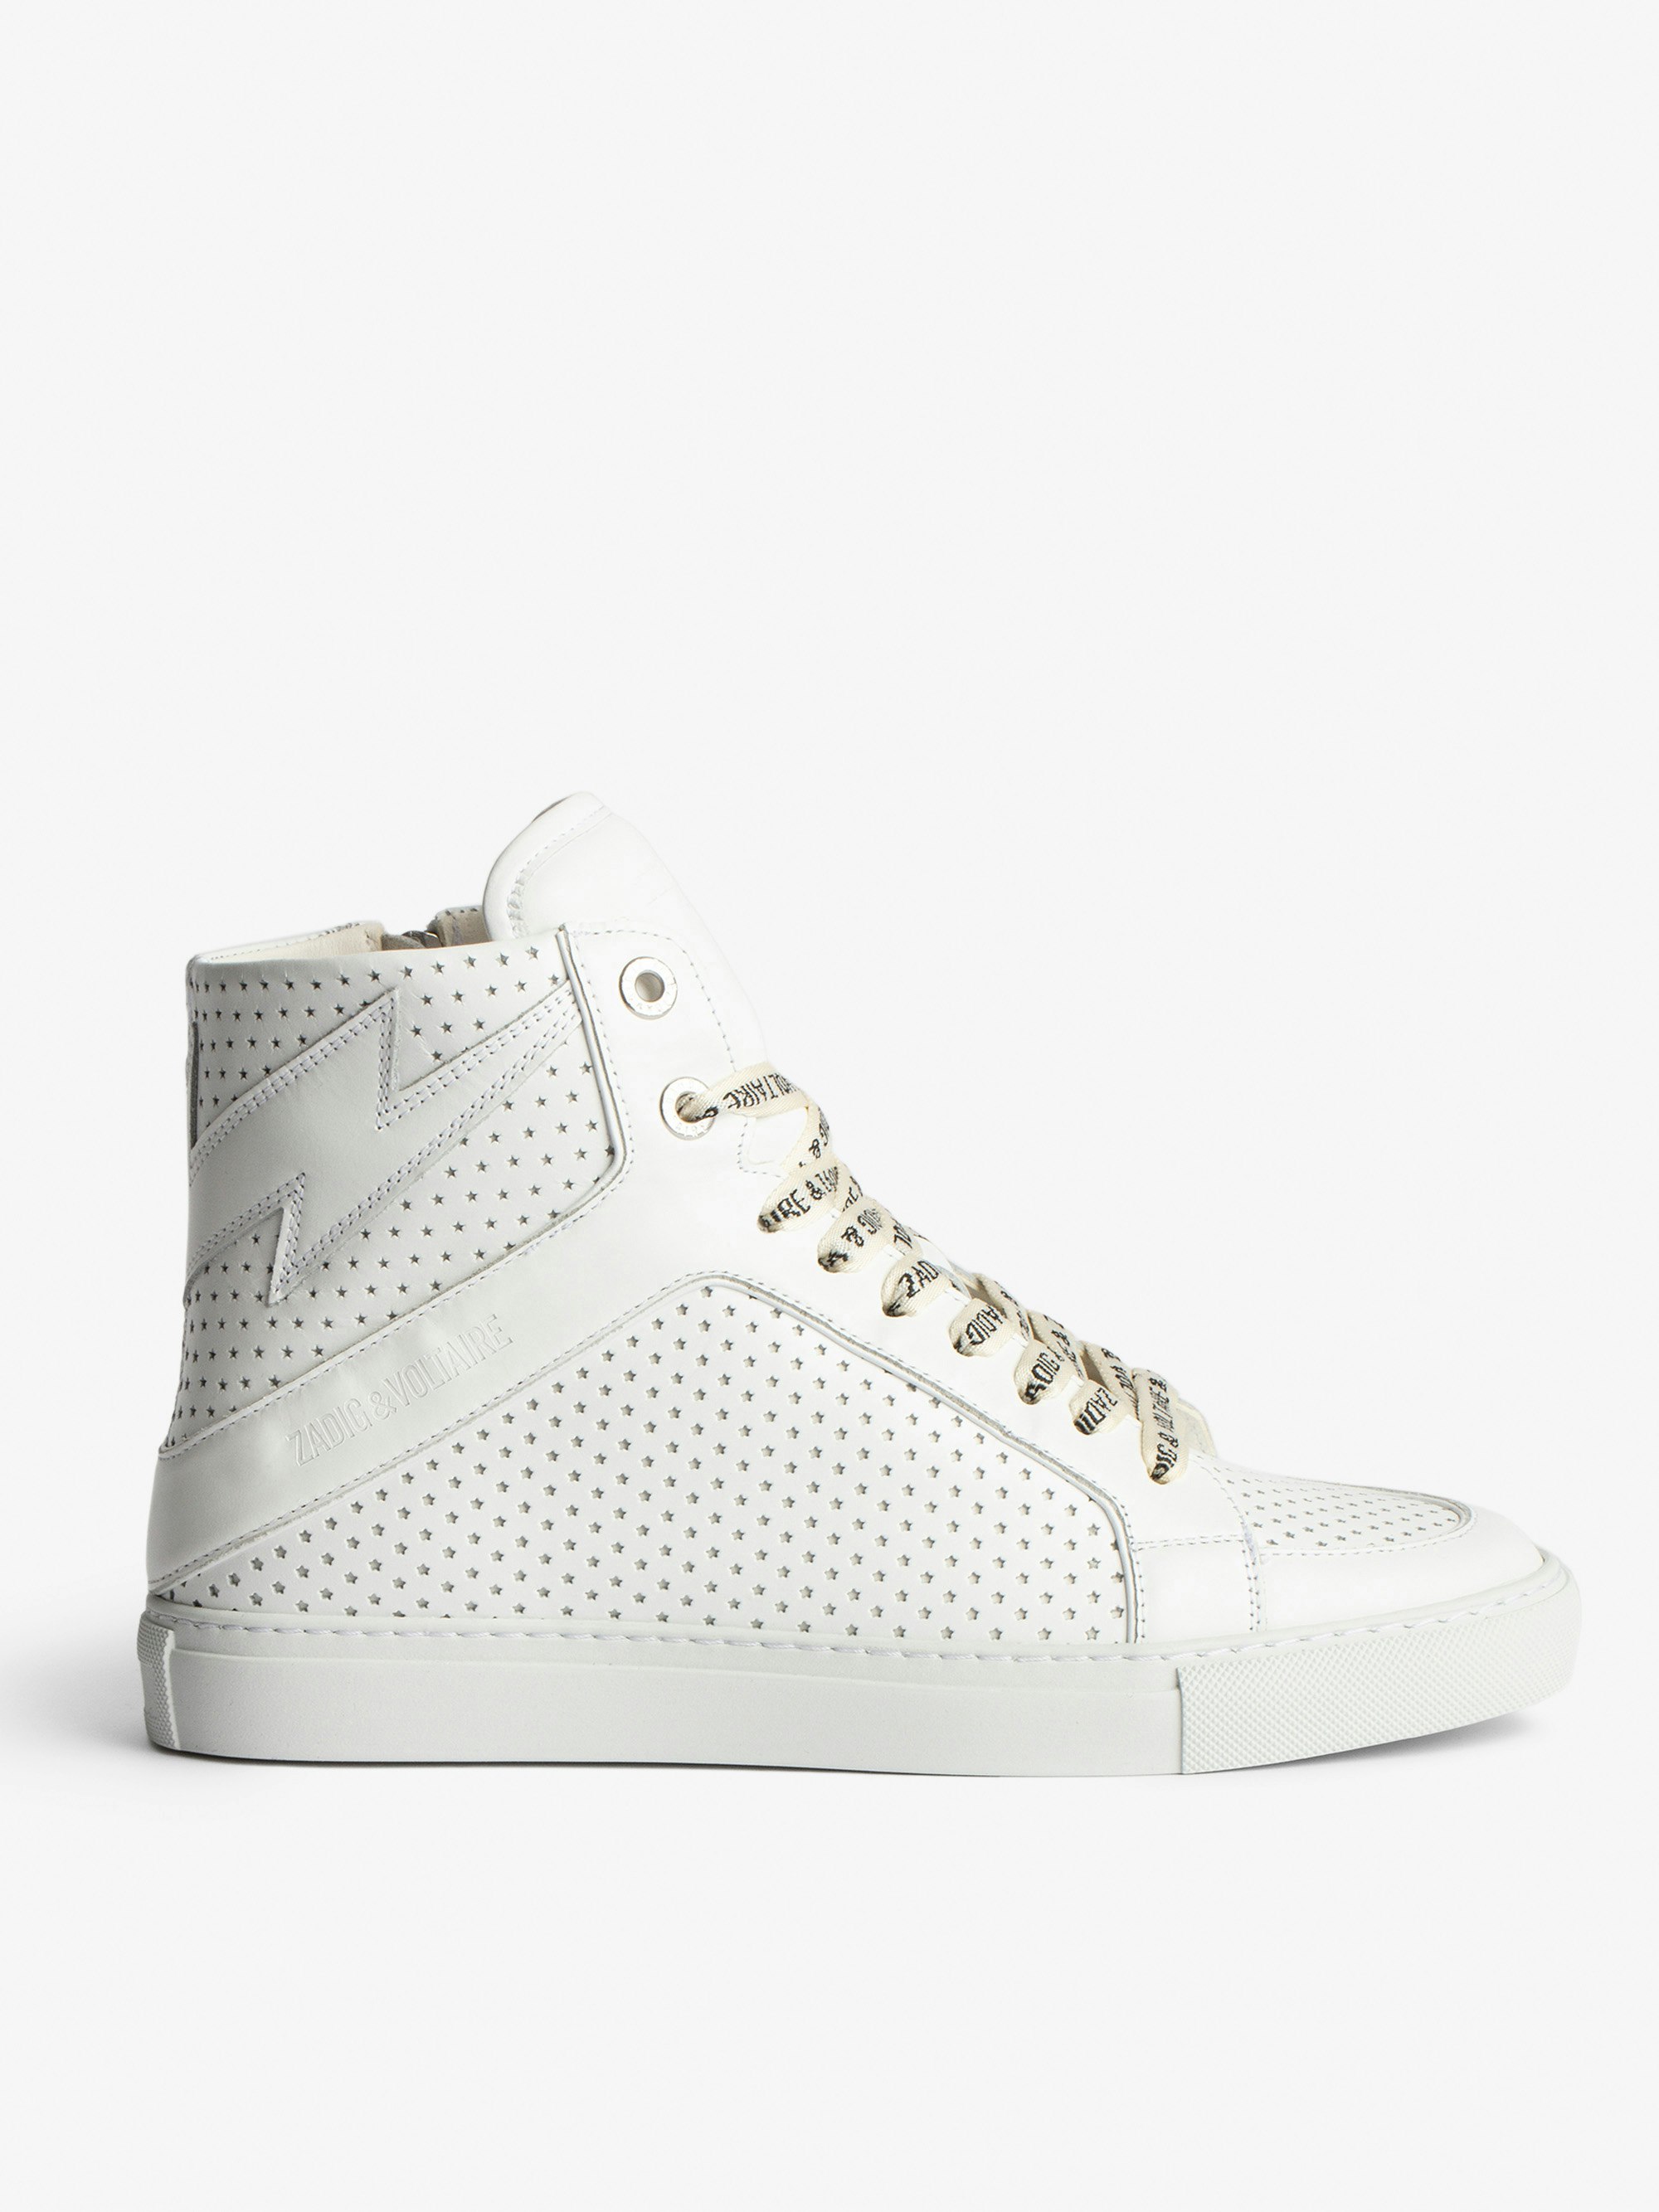 ZV1747 High Flash Smooth Sneakers - Women's high-top sneakers in smooth white leather with perforated stars